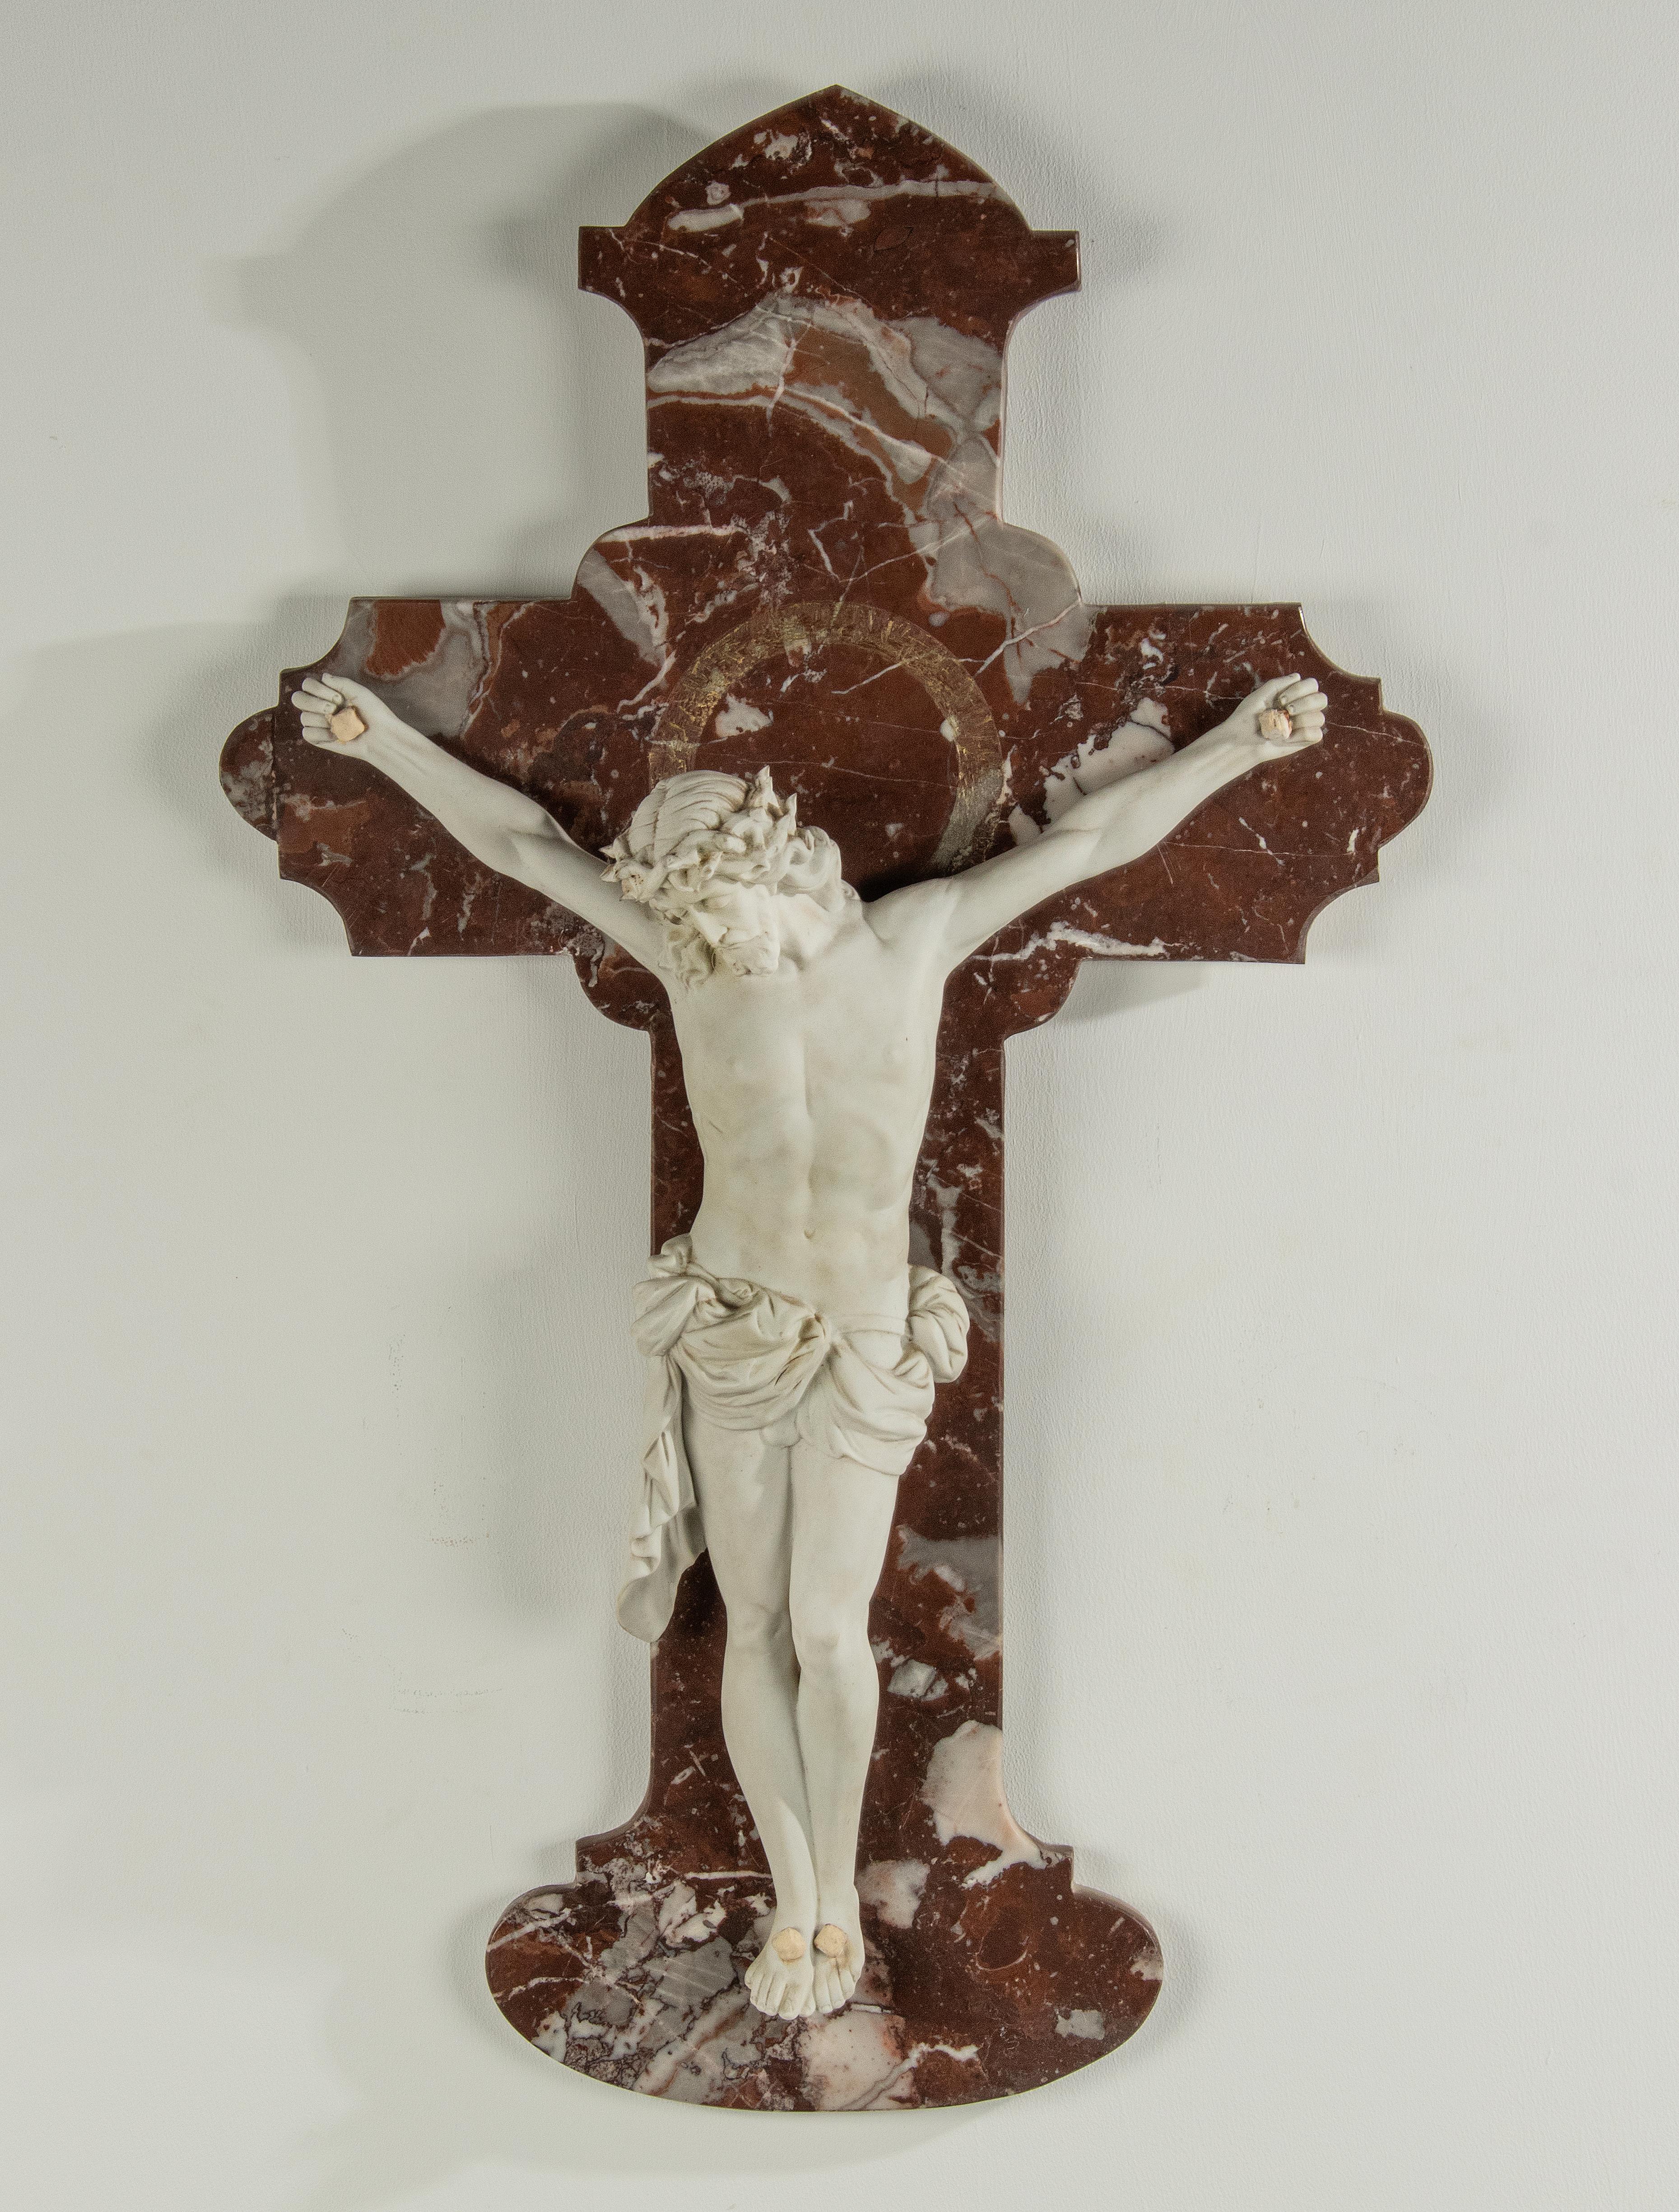 A large size, antique sculpture of Corpus Christi. The sculpture is made of unglazed porcelain, signed and numbered on the back: Sachsen. The porcelain figure of Jesus hangs on a red ‘Royal Rouge’ marble cross. This item is in good condition.